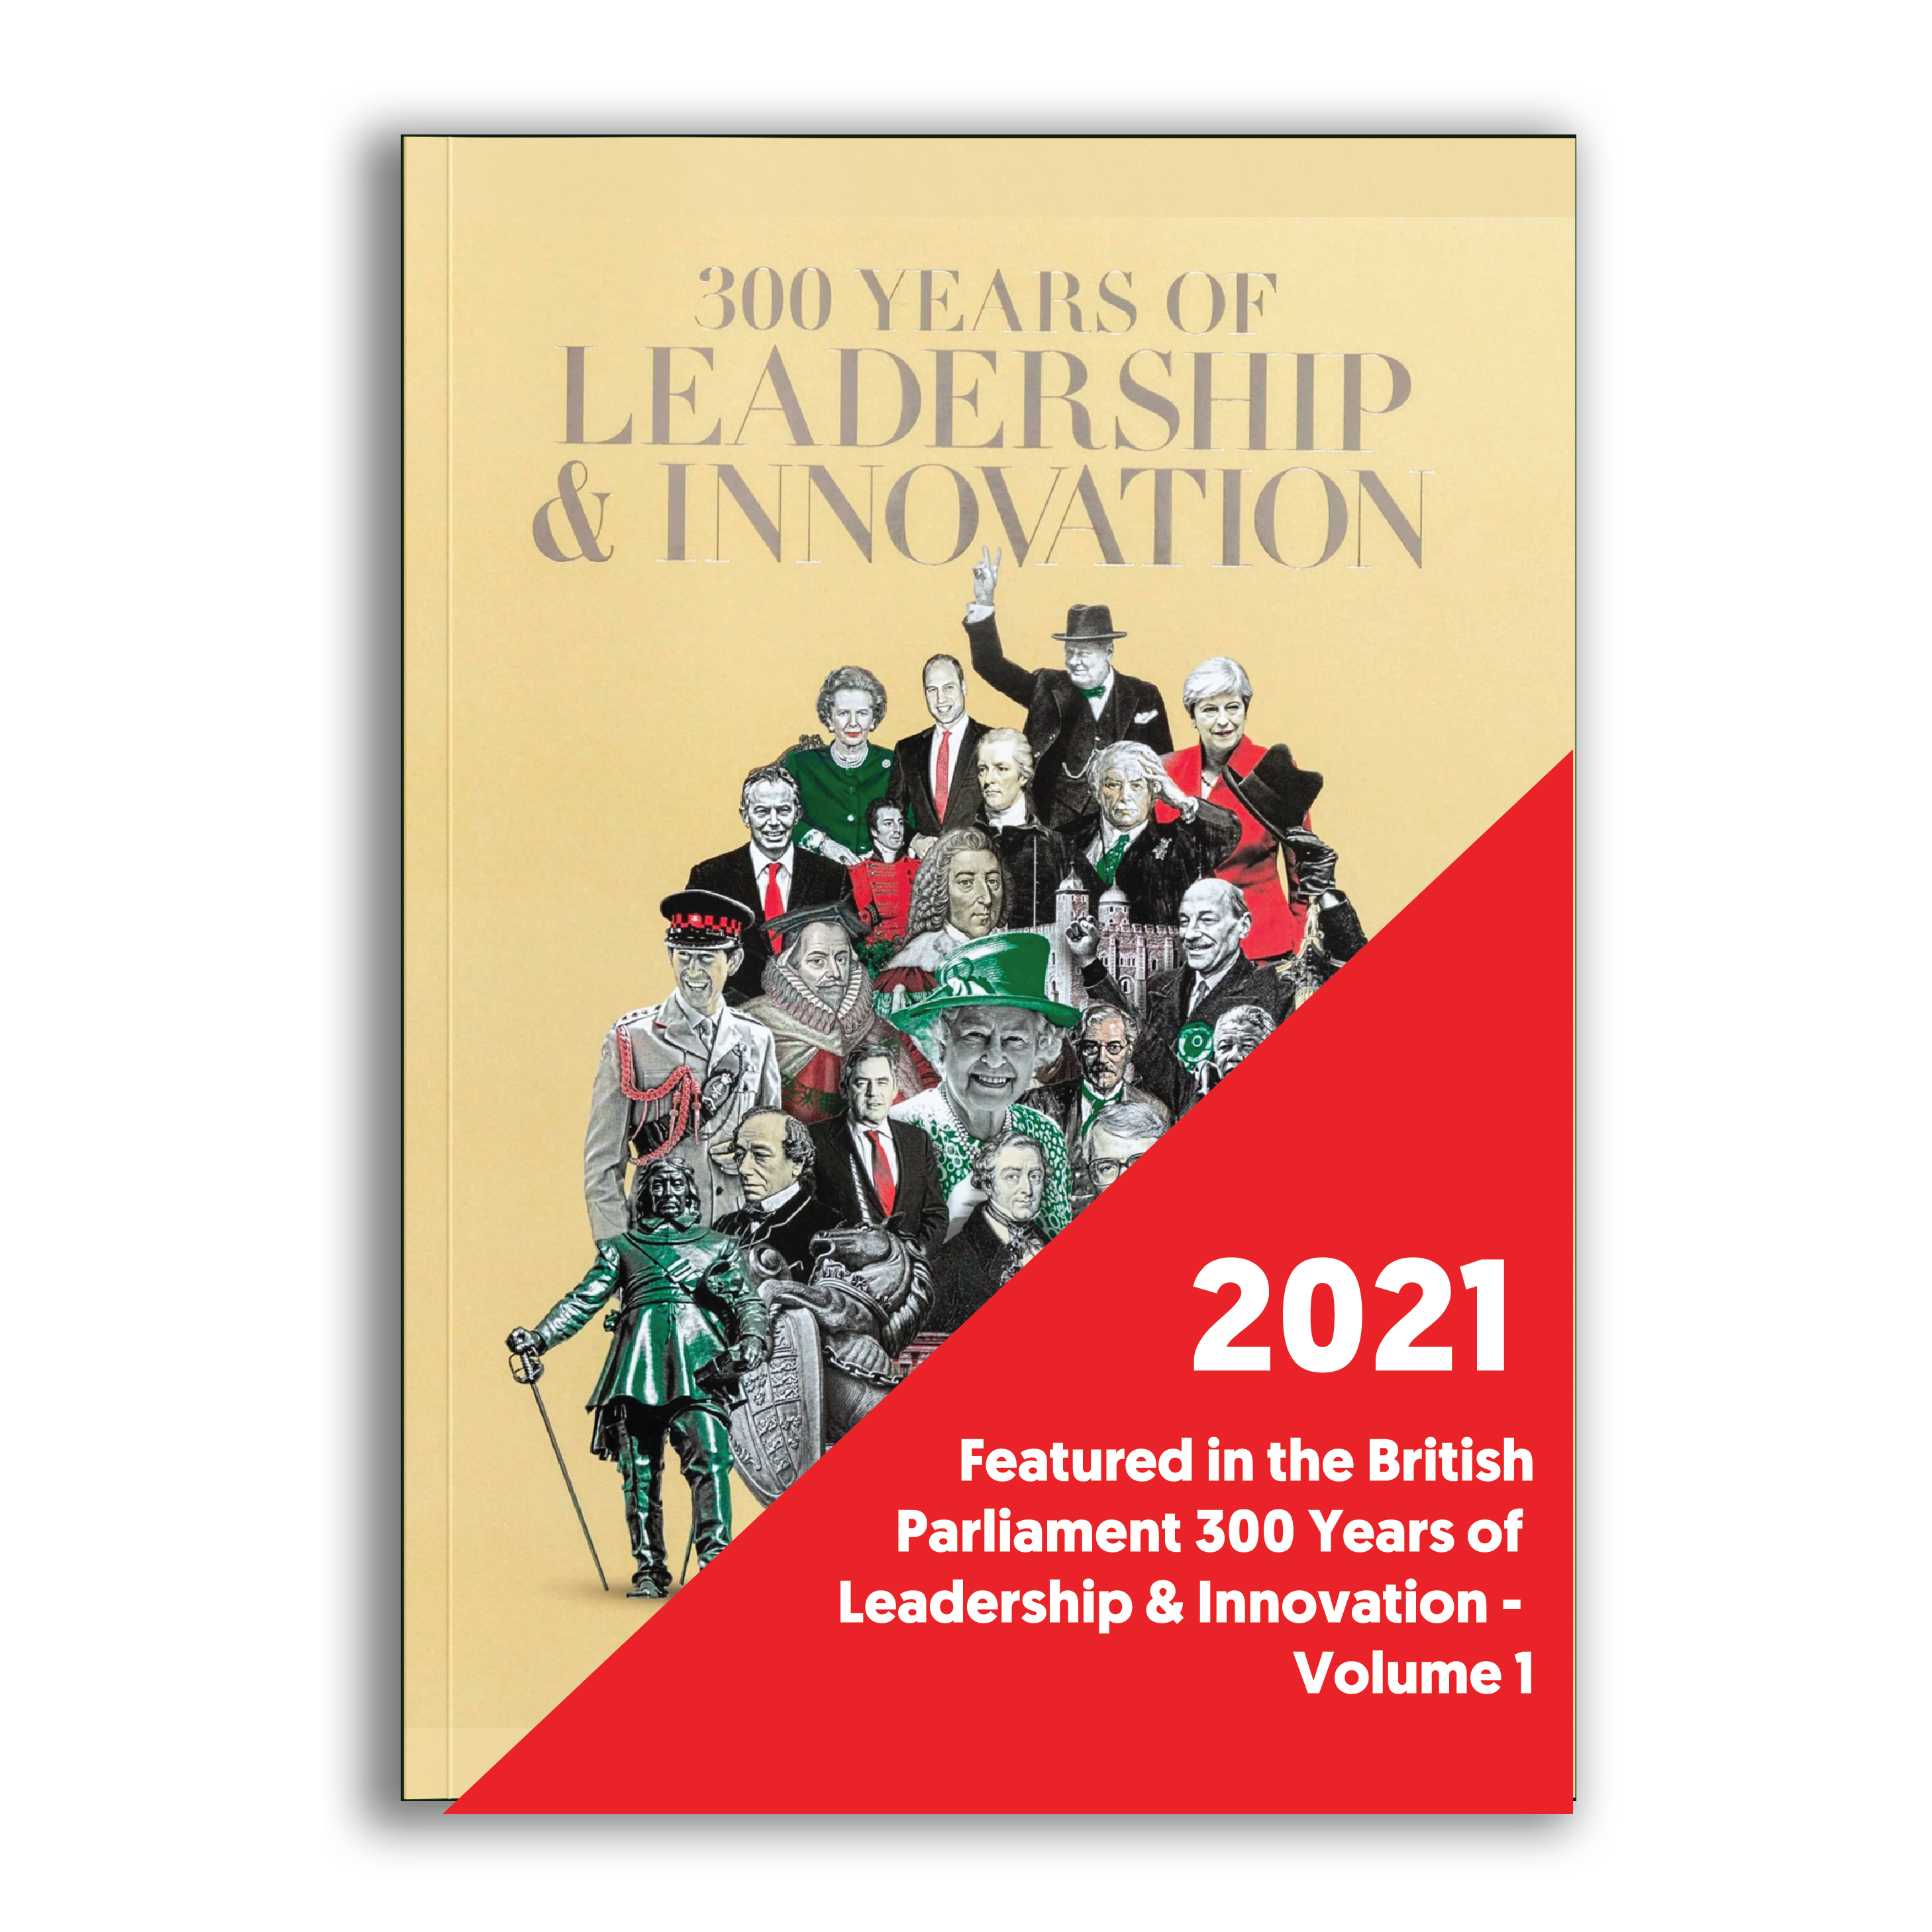 ACE EdVenture featured in the British Parliament 300 Years of Leadership and Innovation - Volume 1.